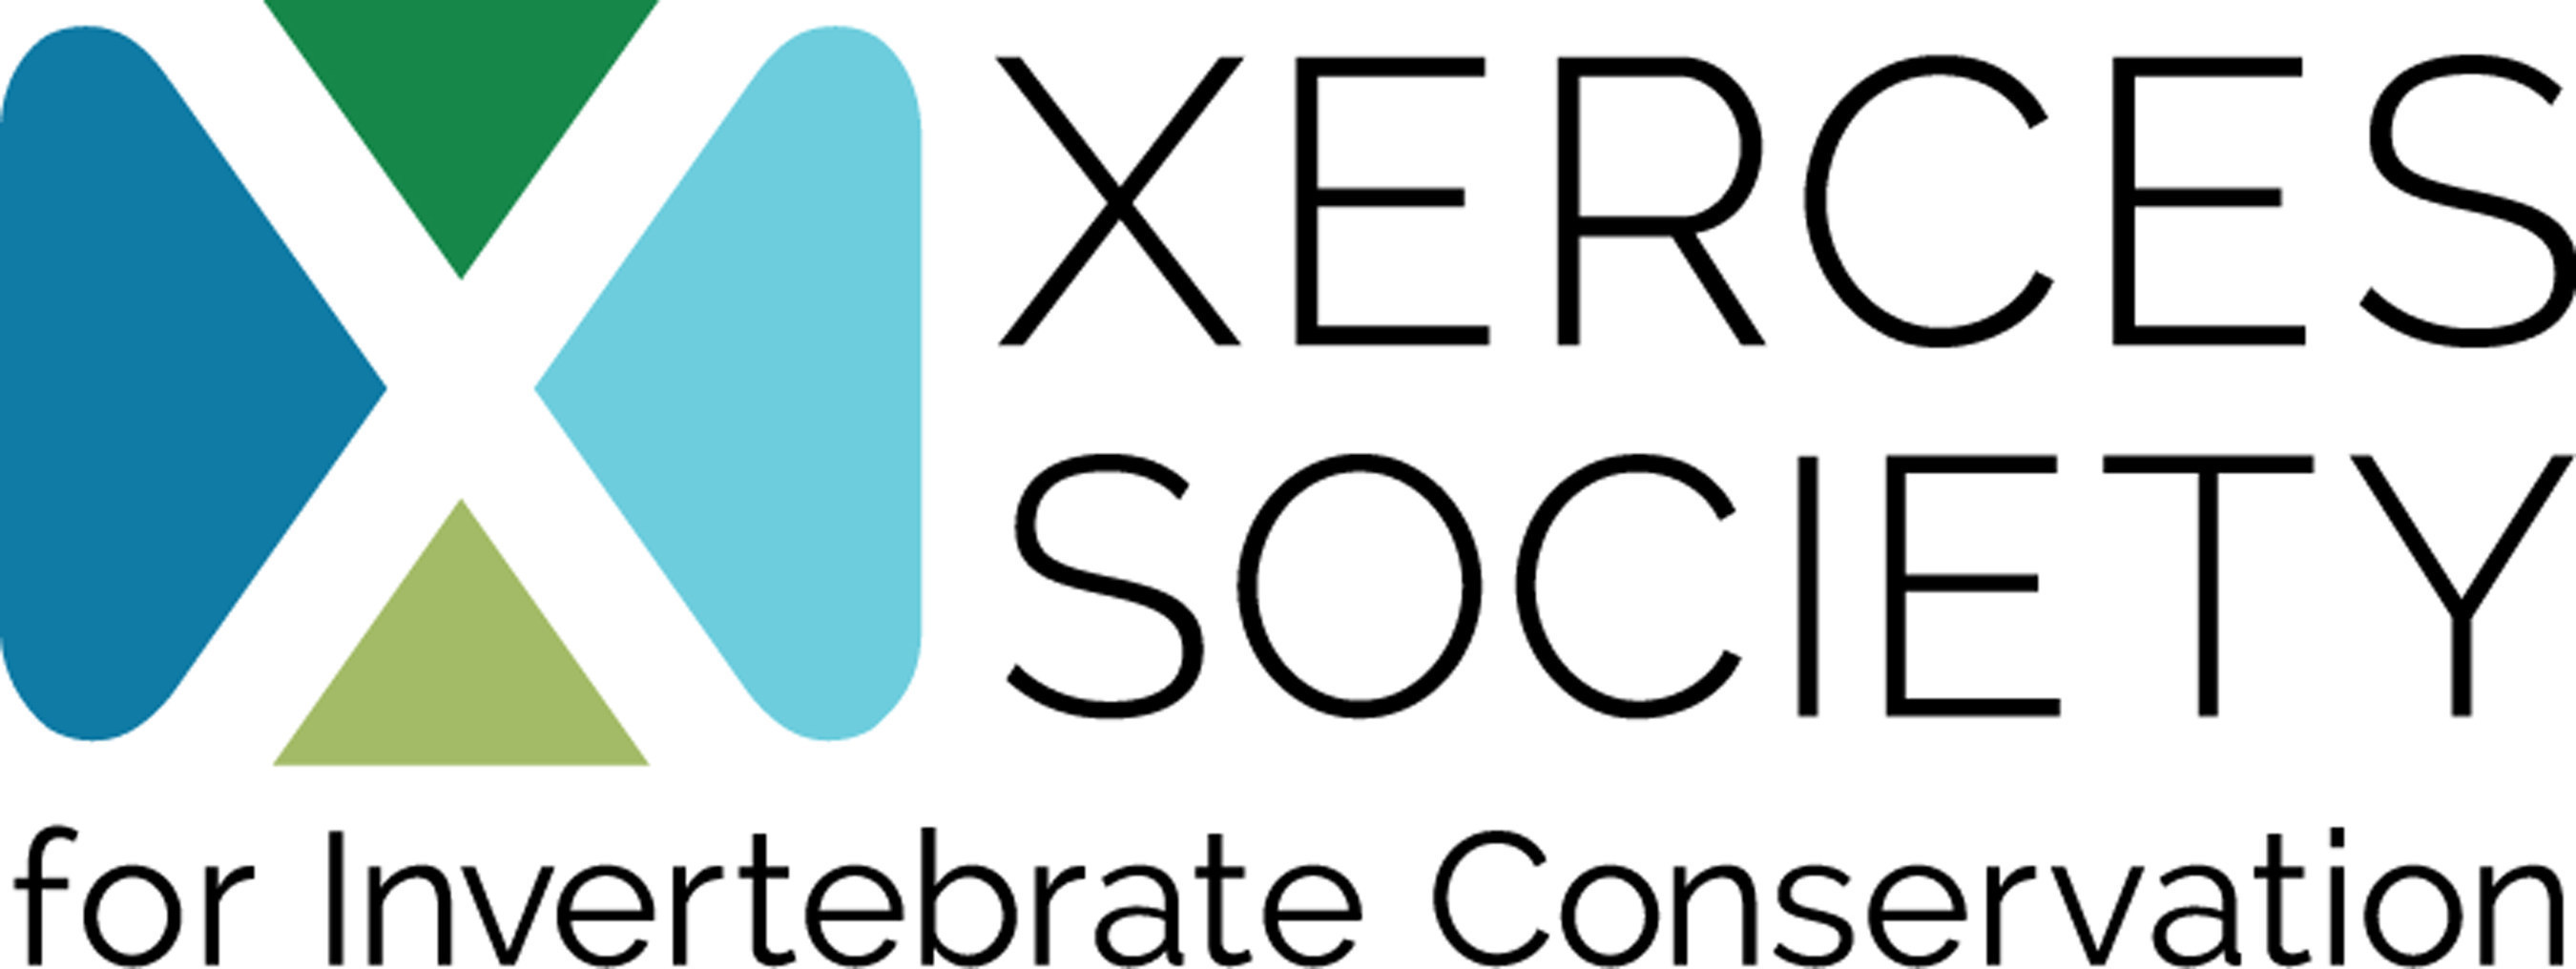 Image result for xerces society logo